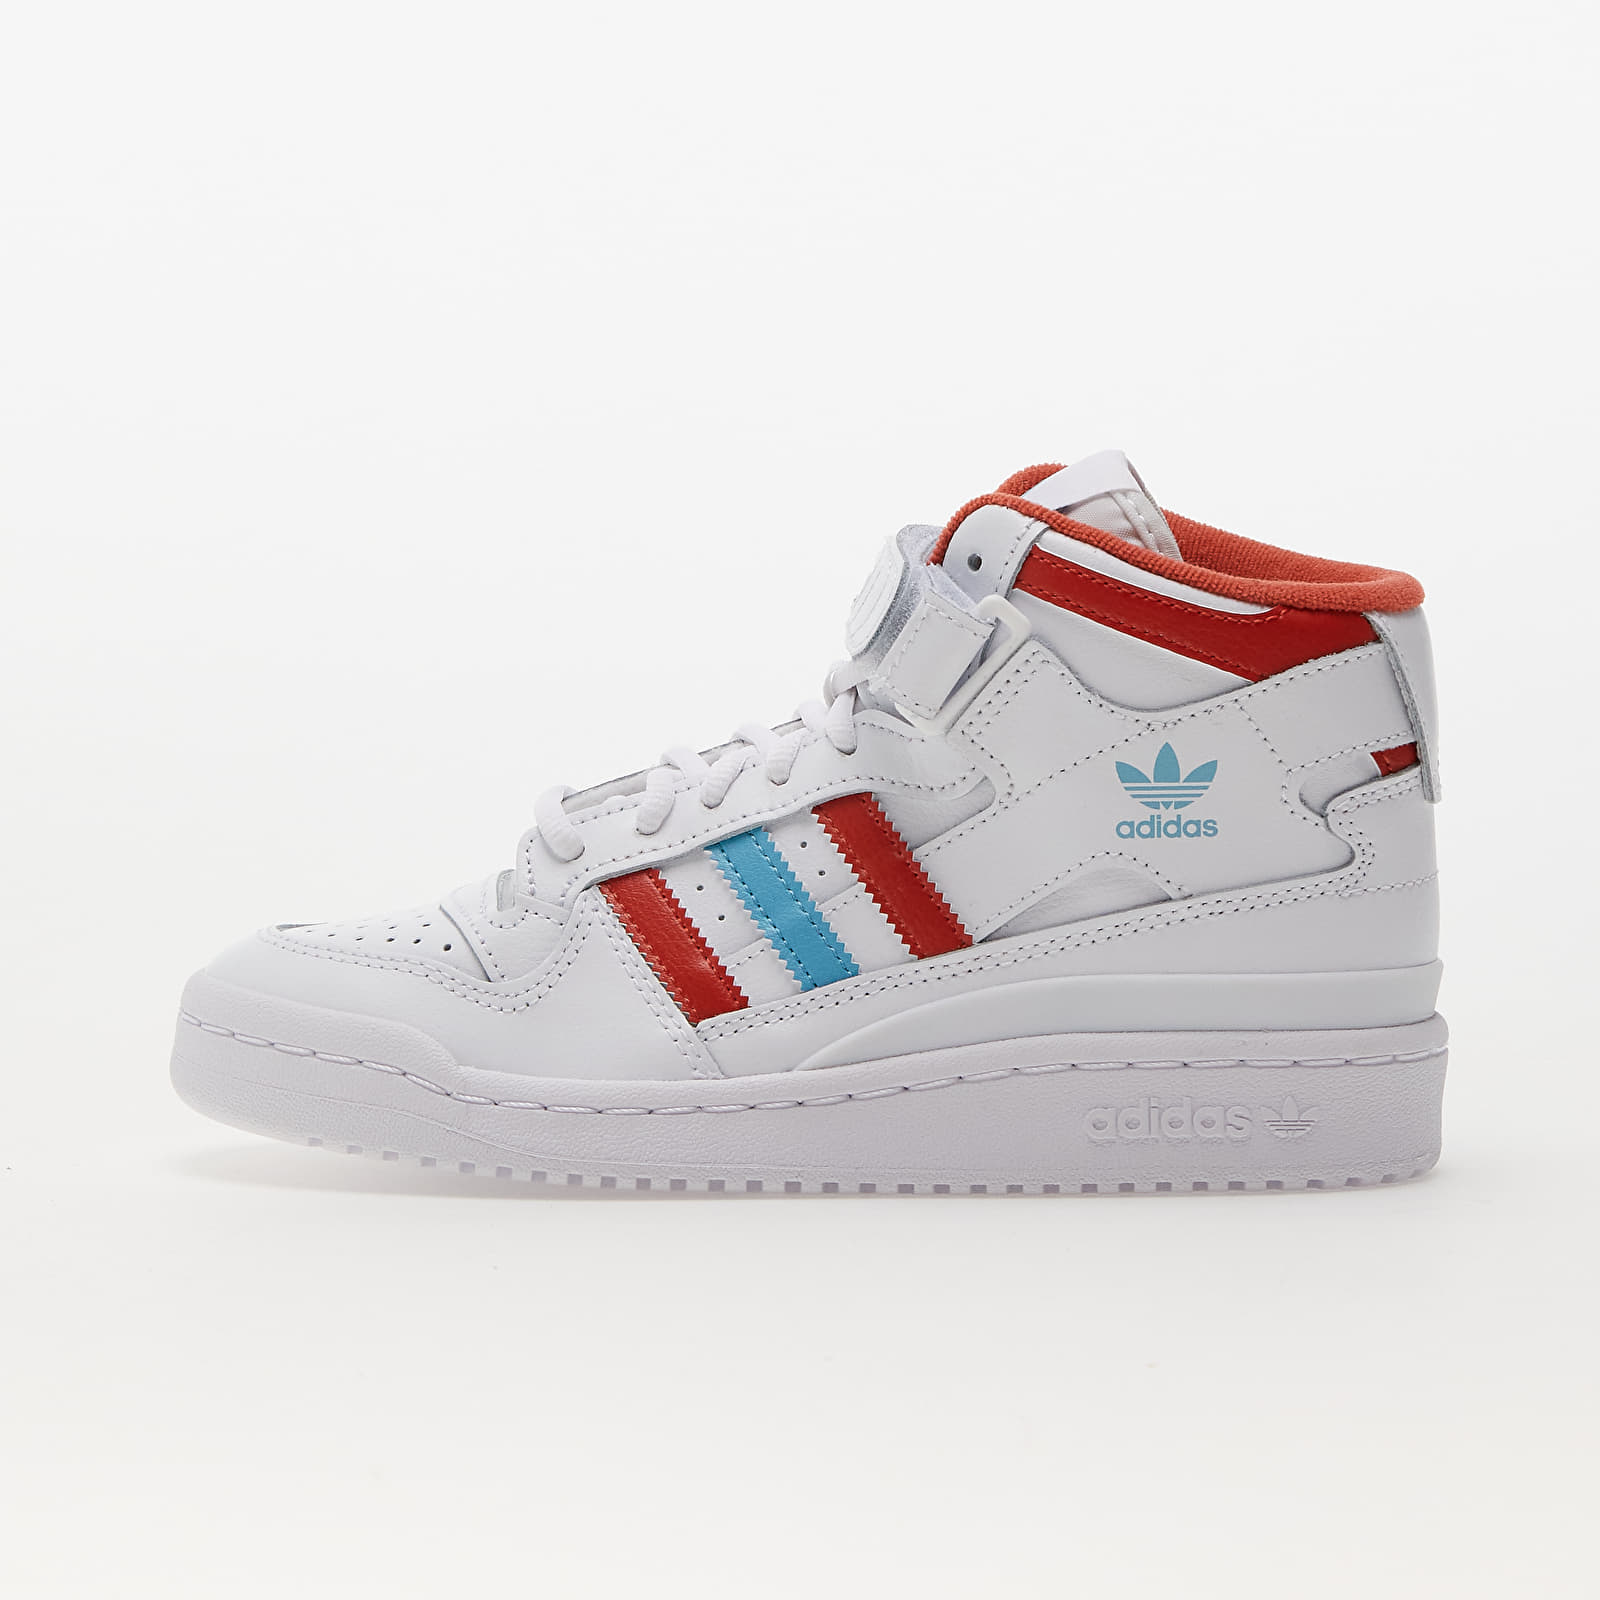 Women's shoes adidas Forum Mid W Ftw White/ Preloved Red/ Preloved Blue